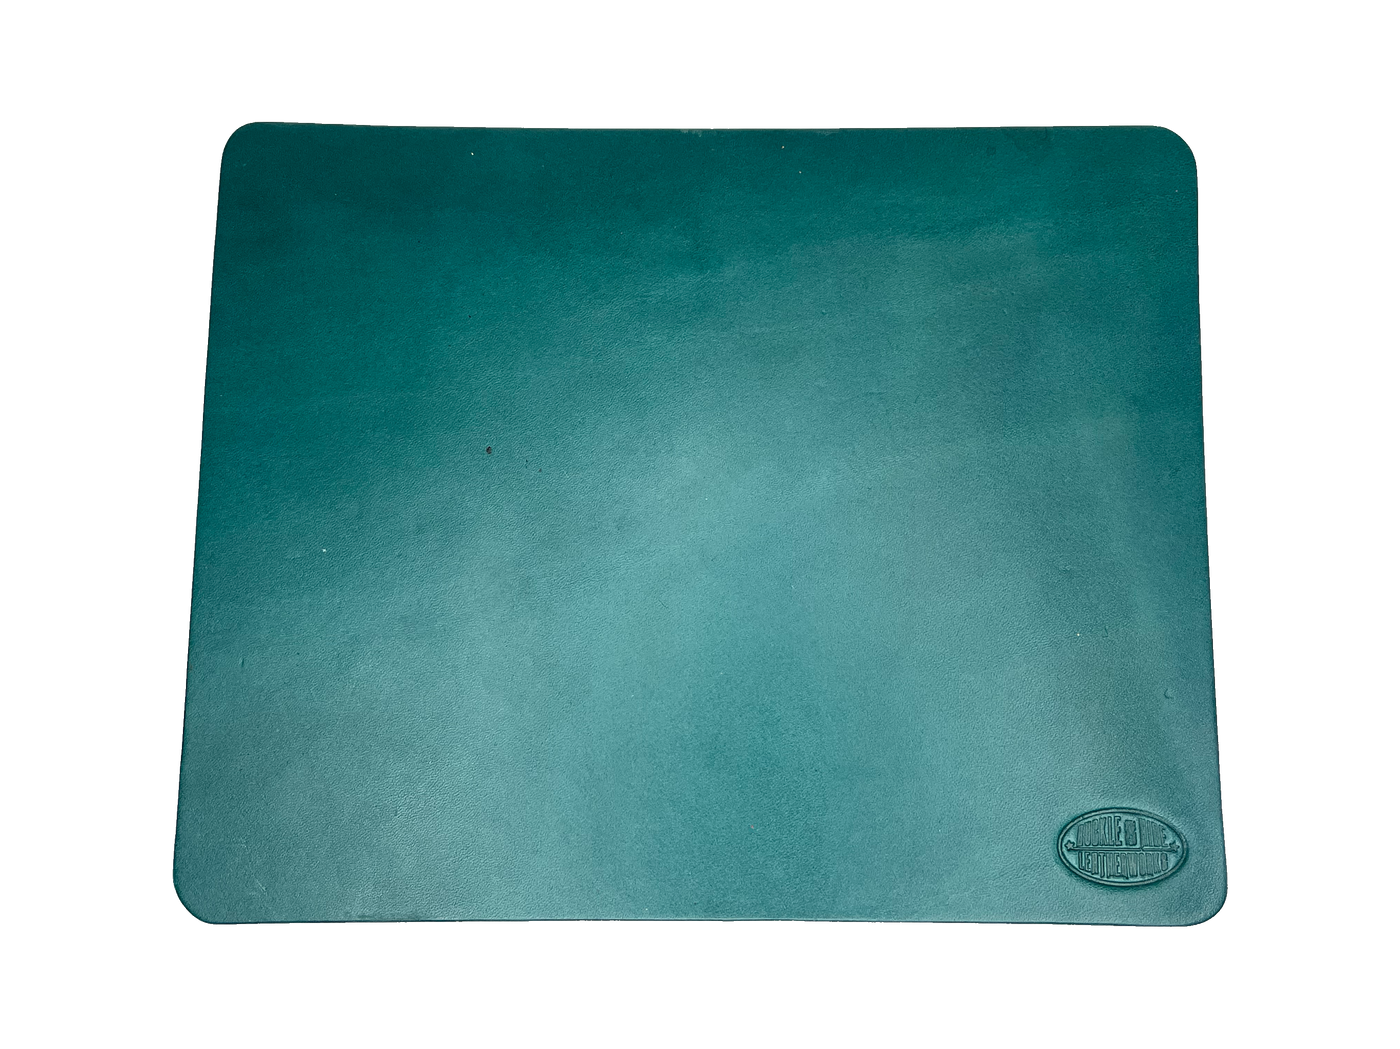 This heavy Bridle leather mouse pad with hand burnished smooth edges and is approx. 1/8" thick. Size is 8" x 10".  This size gives you plenty of room to mouse around! May choose plain or with 1-3 initials stamped in lower left corner with our logo stamped in the lower right corner. Made in our shop just outside Nashville in Smyrna, TN.